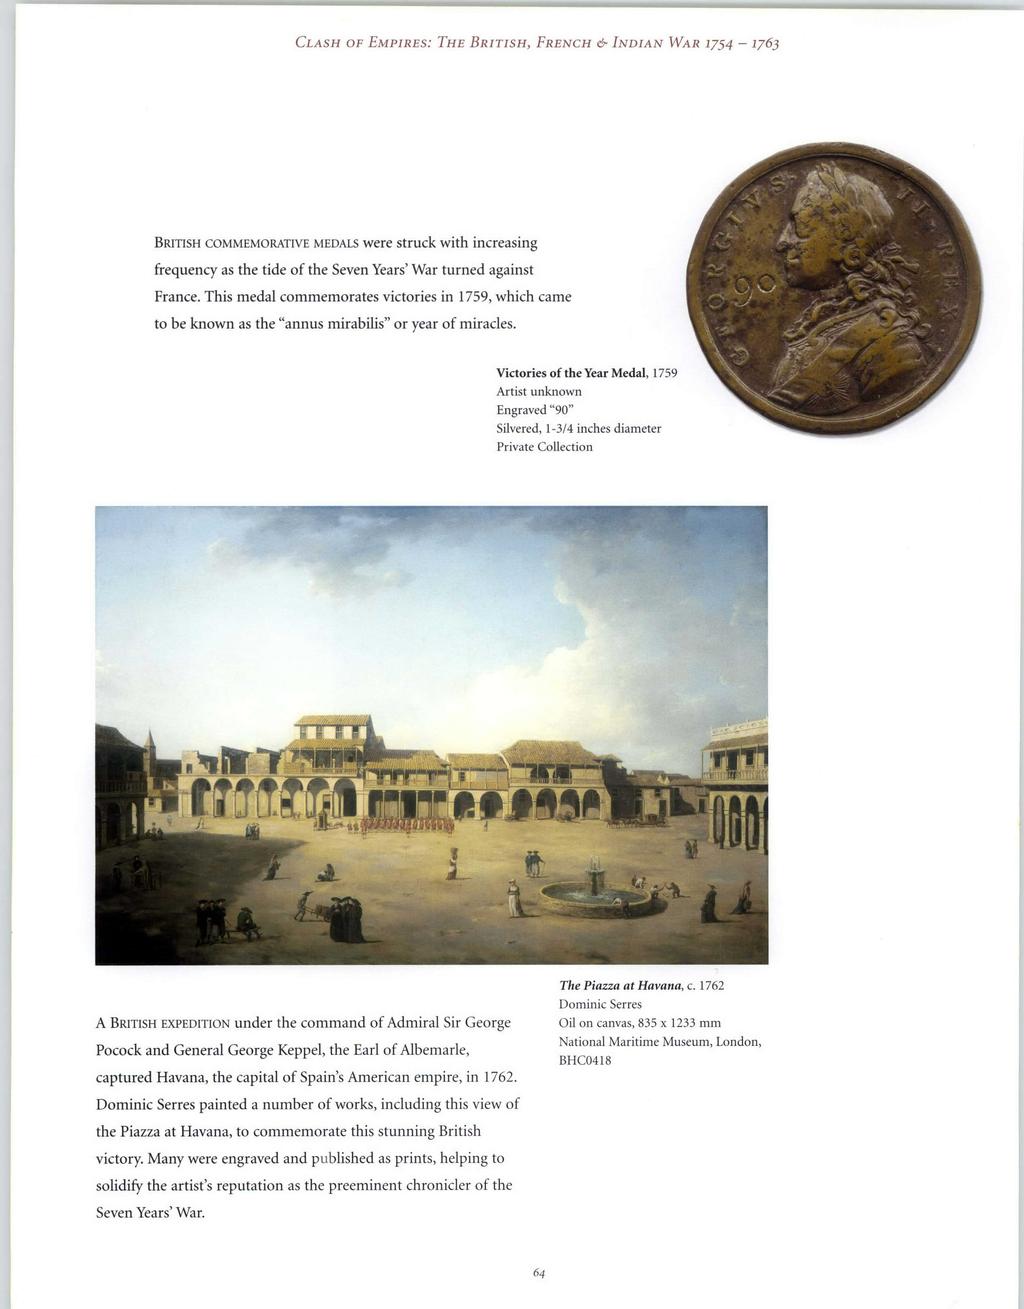 CLASH OF EMPIRES: THE BRITISH, FRENCH & INDIAN WAR 17-54 -1763 BRITISH COMMEMORATIVE MEDALS were struck with increasing frequency as the tide of the Seven Years' War turned against France.